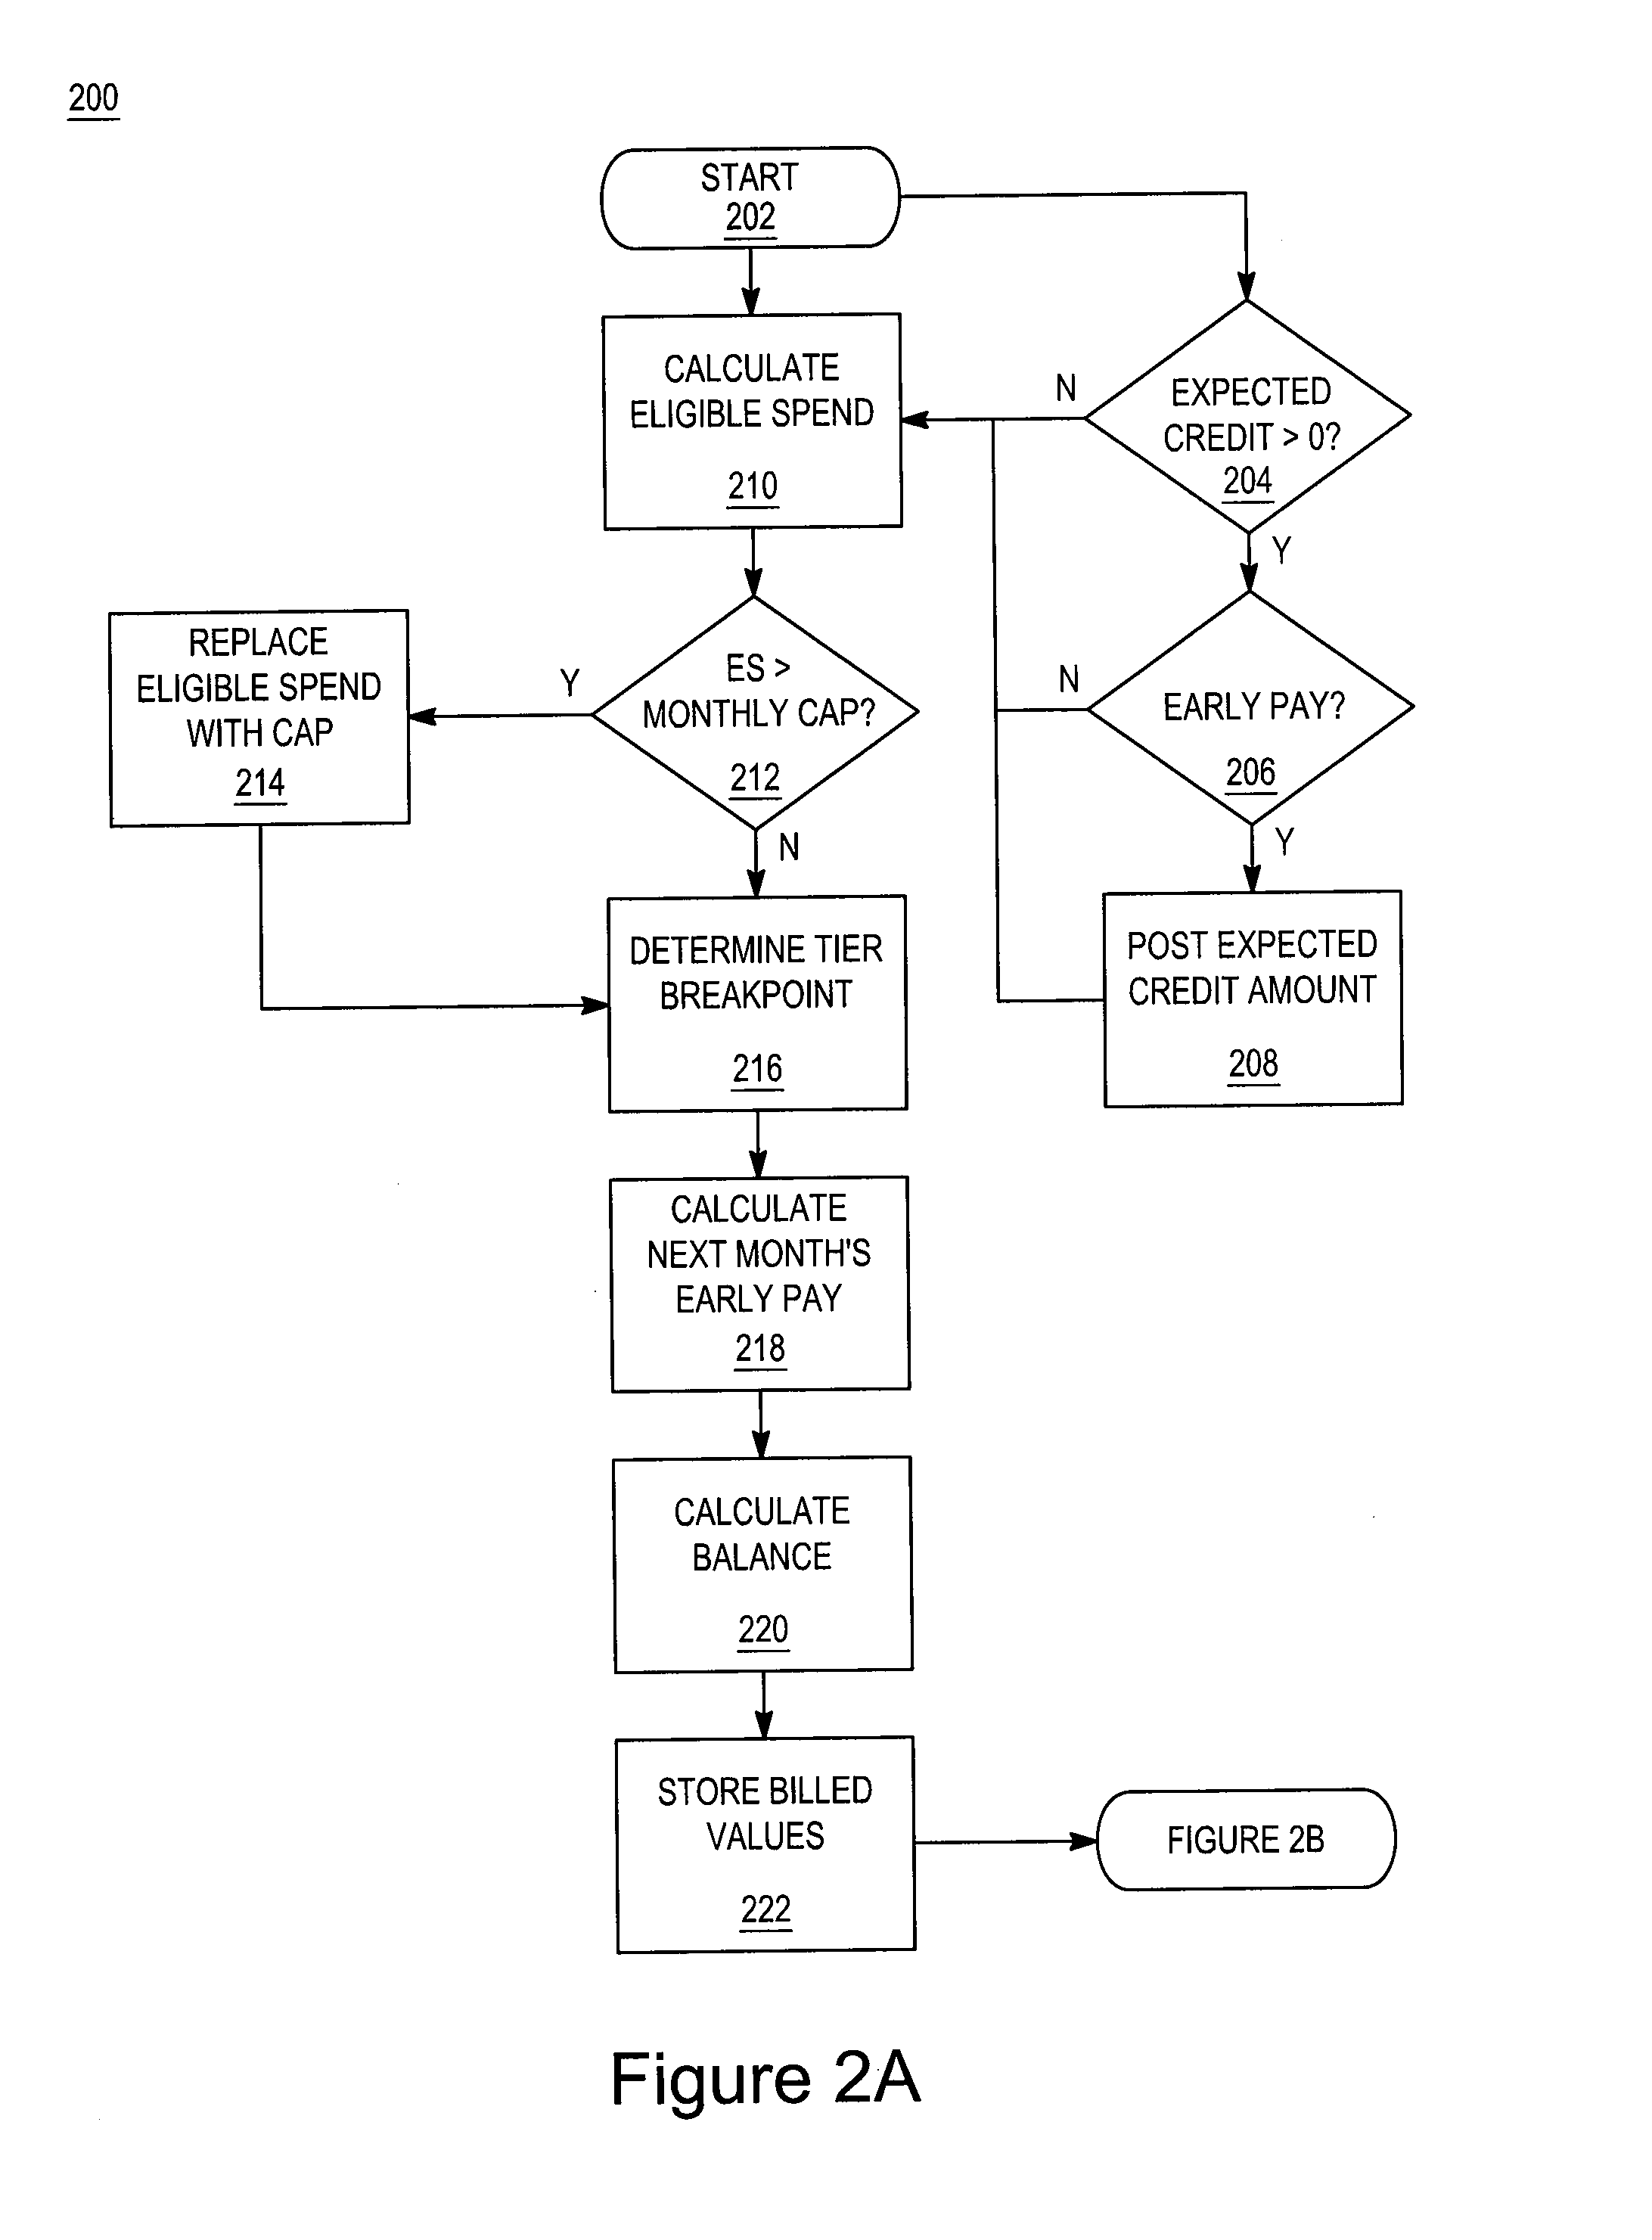 System and method for determining positive consumer behavior based upon structural risk